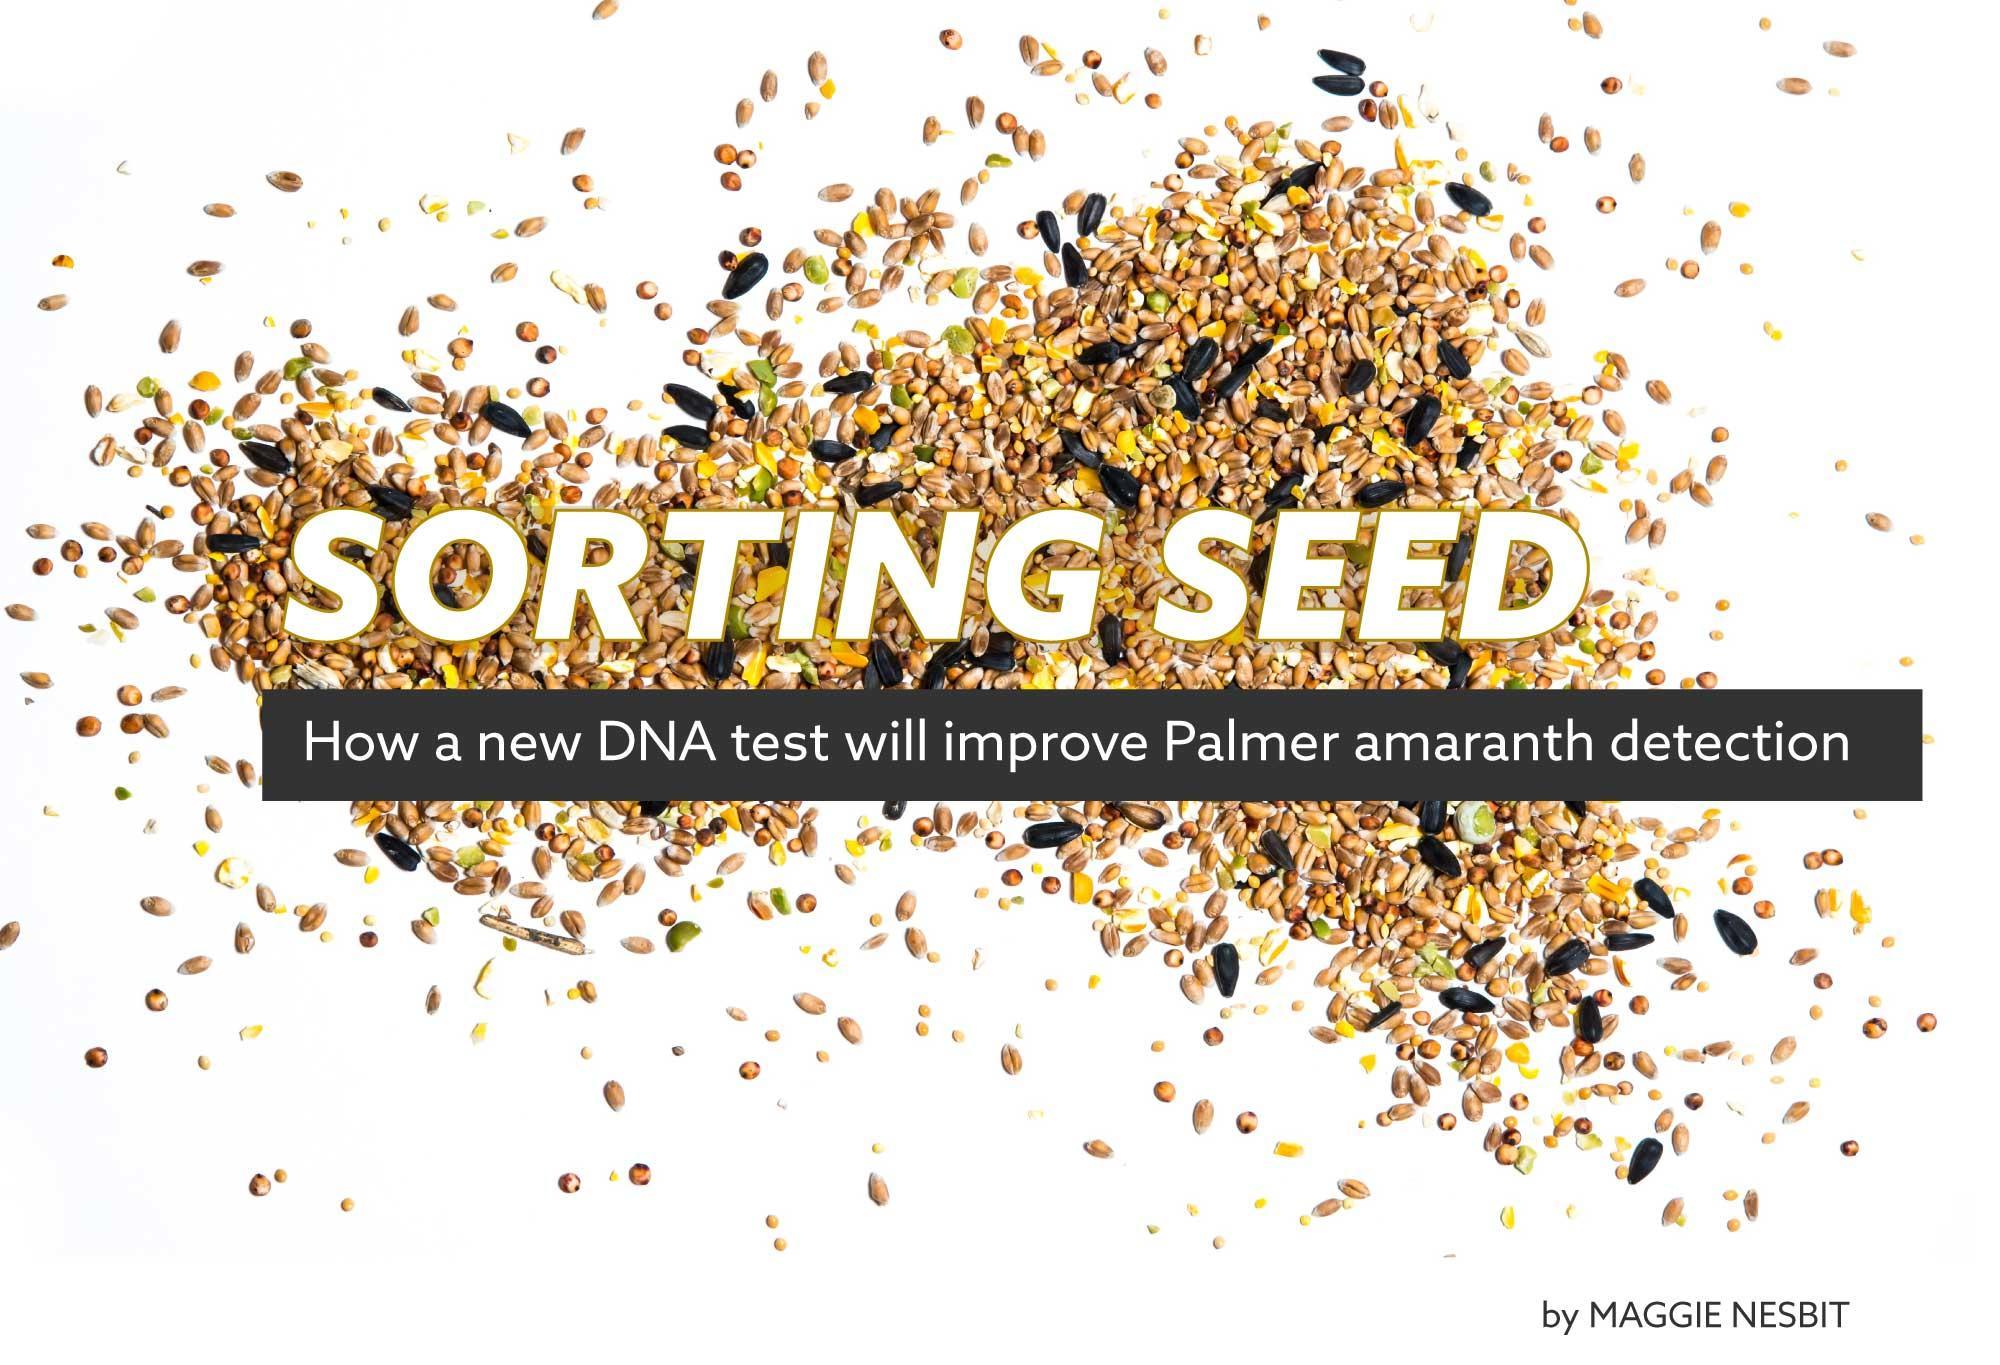 infographic of seeds with the text "sorting seeds"